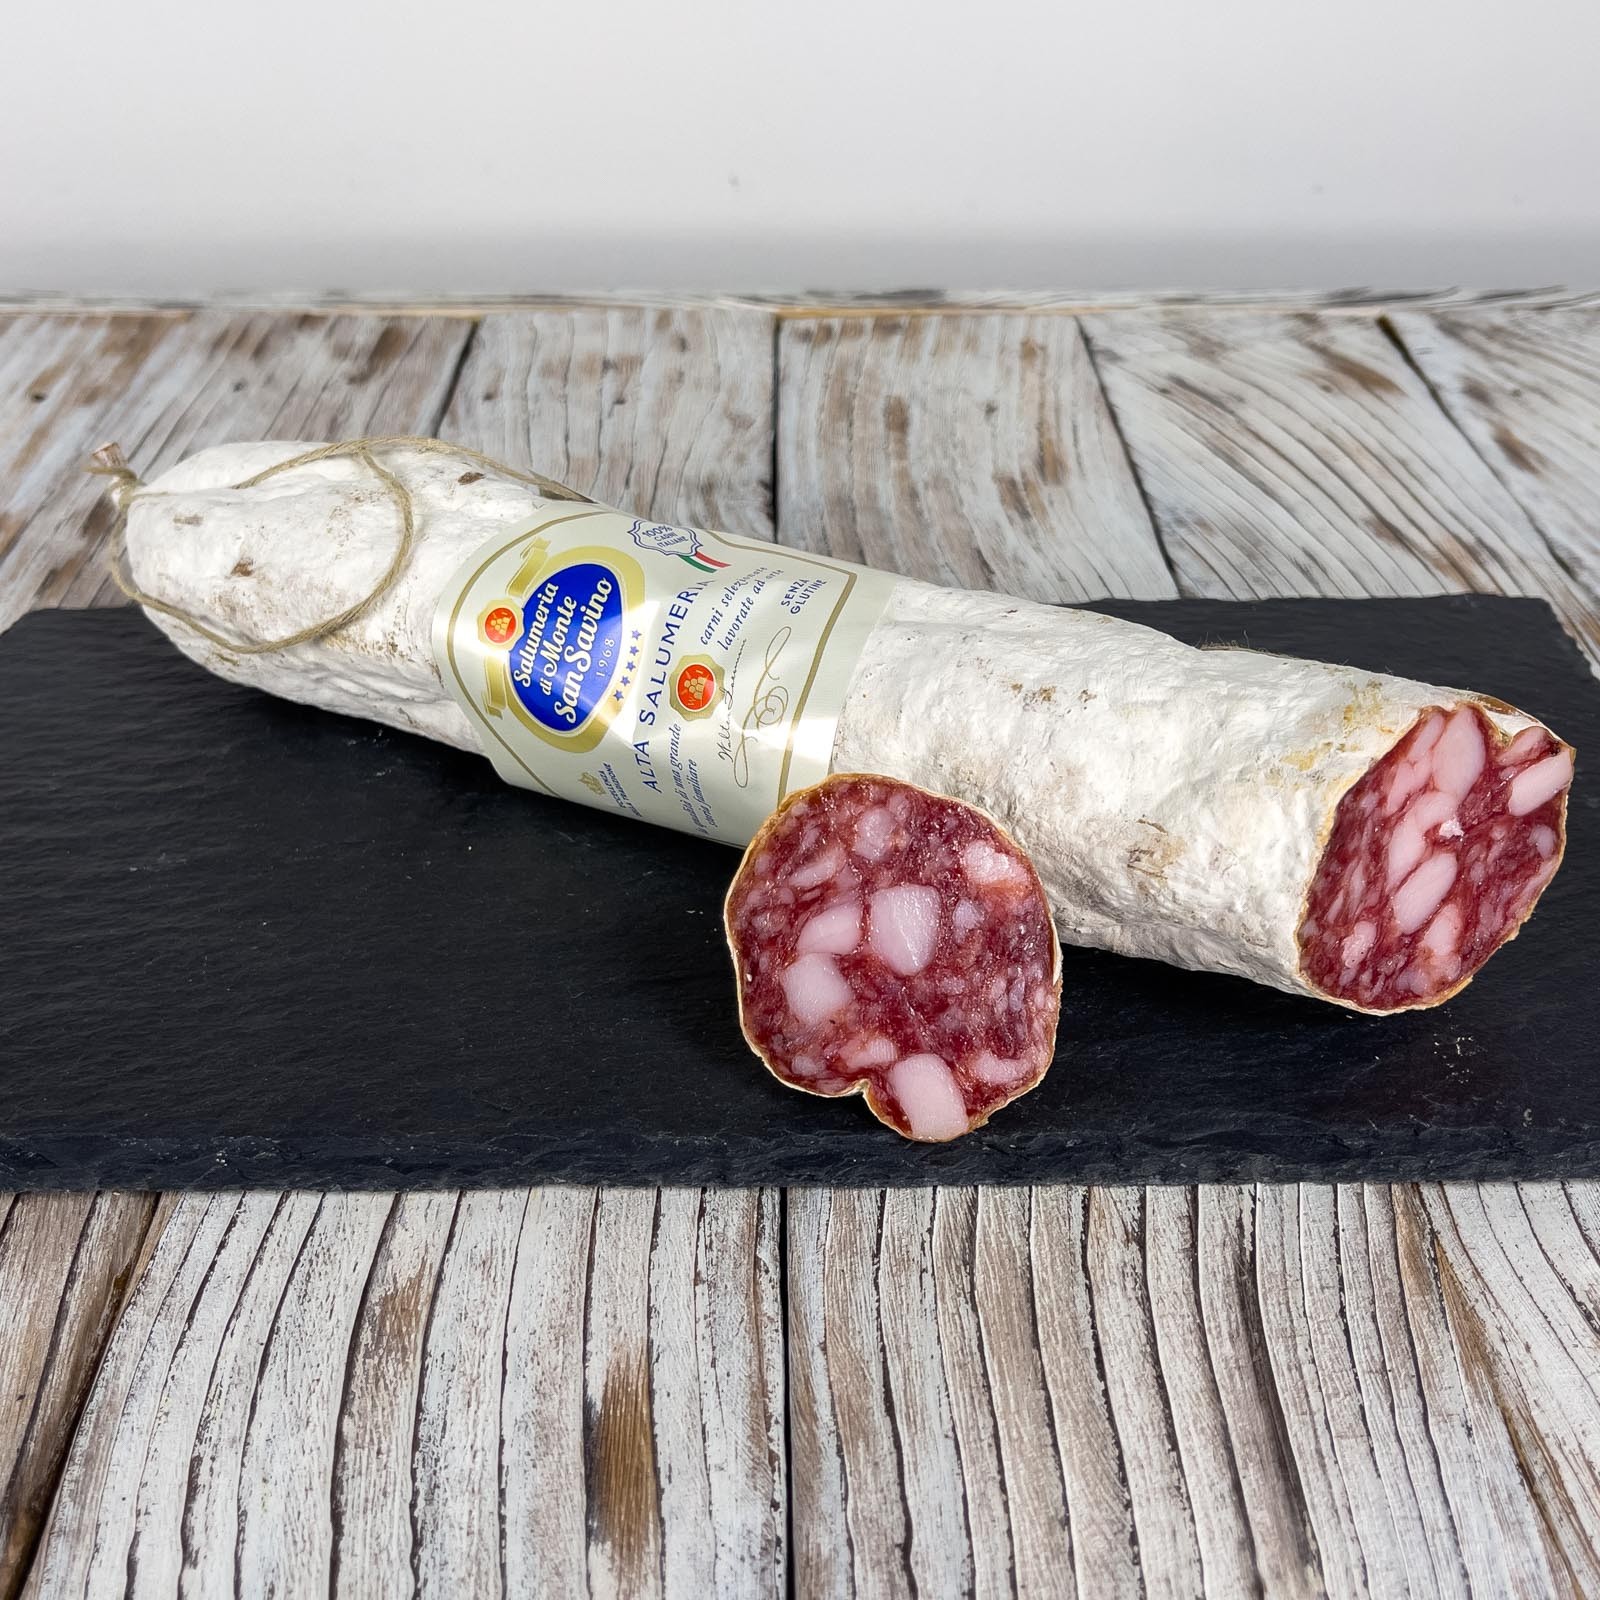 Tuscan Salami is an artisanal sausage typical of the Tuscan gastronomic tradition, made according to an ancient recipe handed down for centuries. It is characterized by a soft and compact consistency, bright red color and a particularly intense taste, enriched with spices and aromas. This version of Tuscan Salami has a net weight of about 500 g and is packaged whole in natural casing.